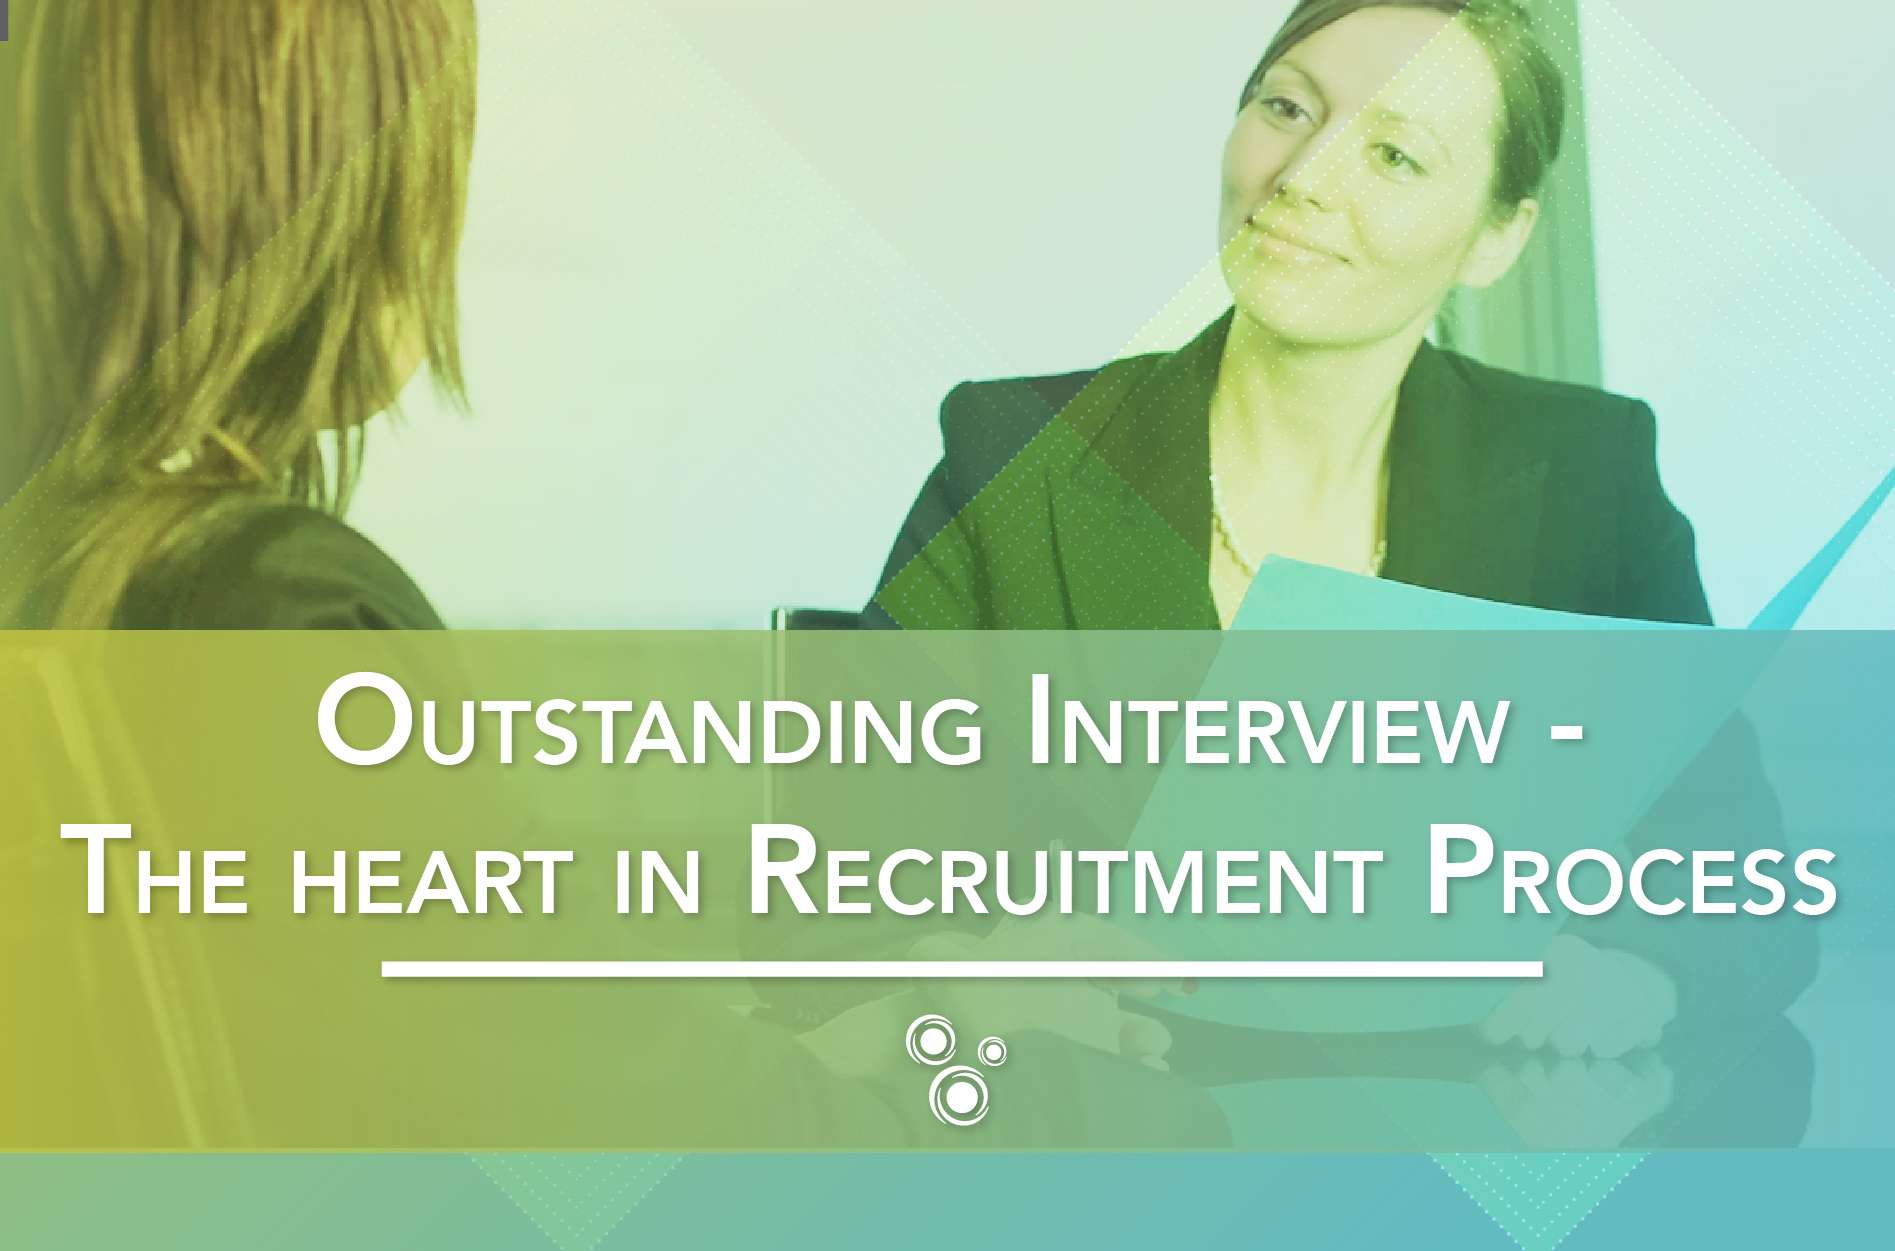 Outstanding Interview - The heart in Recruitment Process